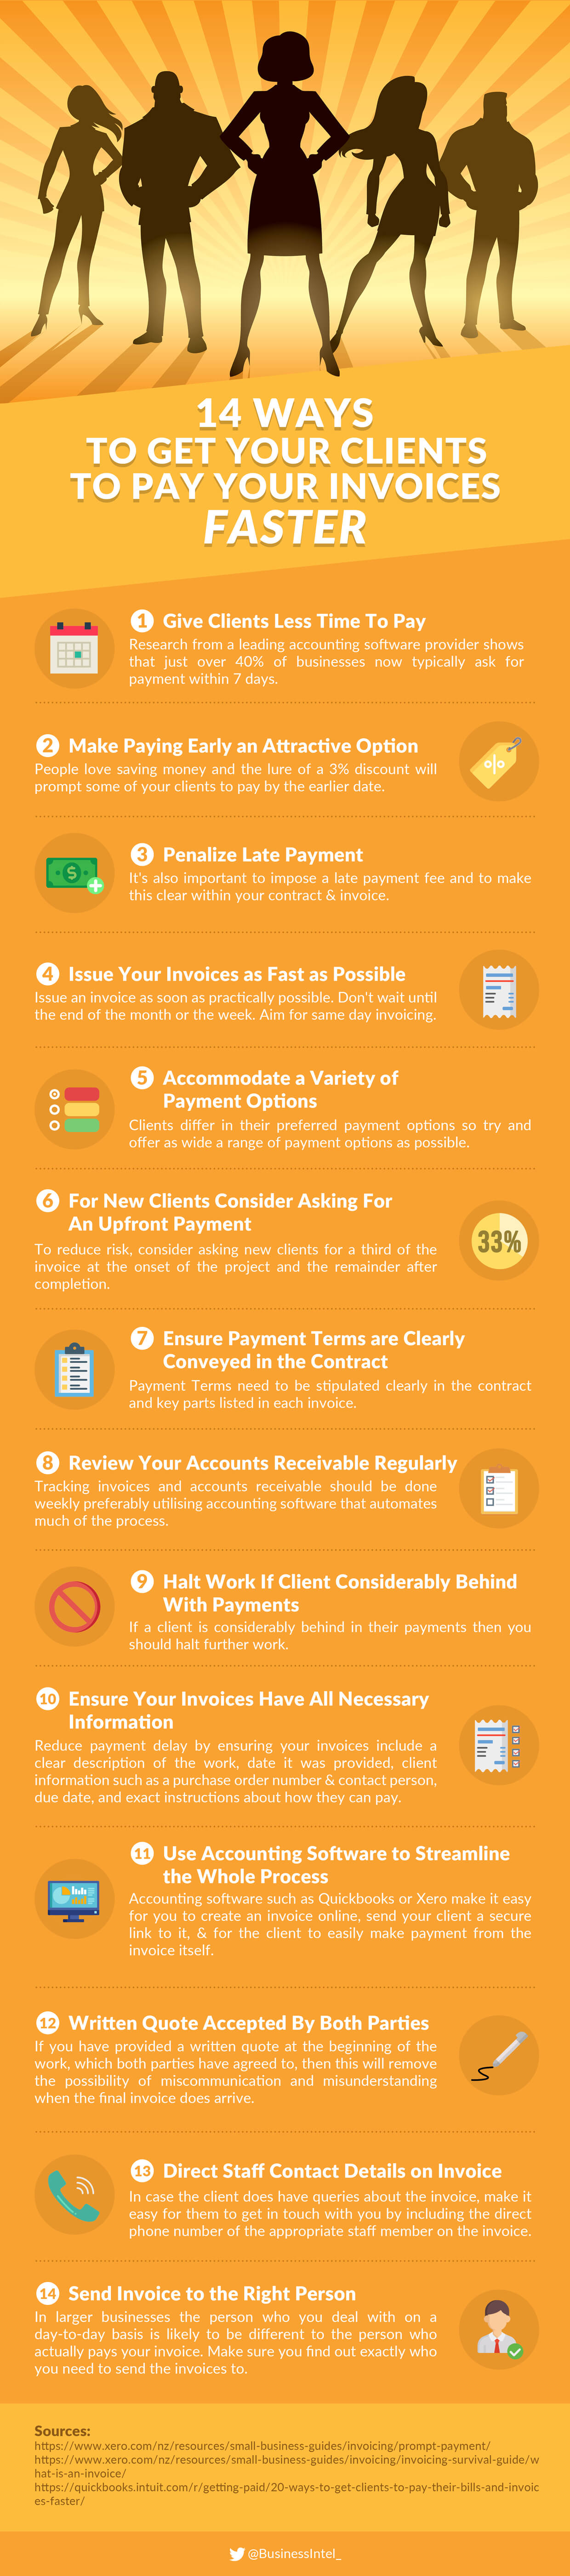 14 Ways To Get Your Clients to Pay Your Invoices Faster